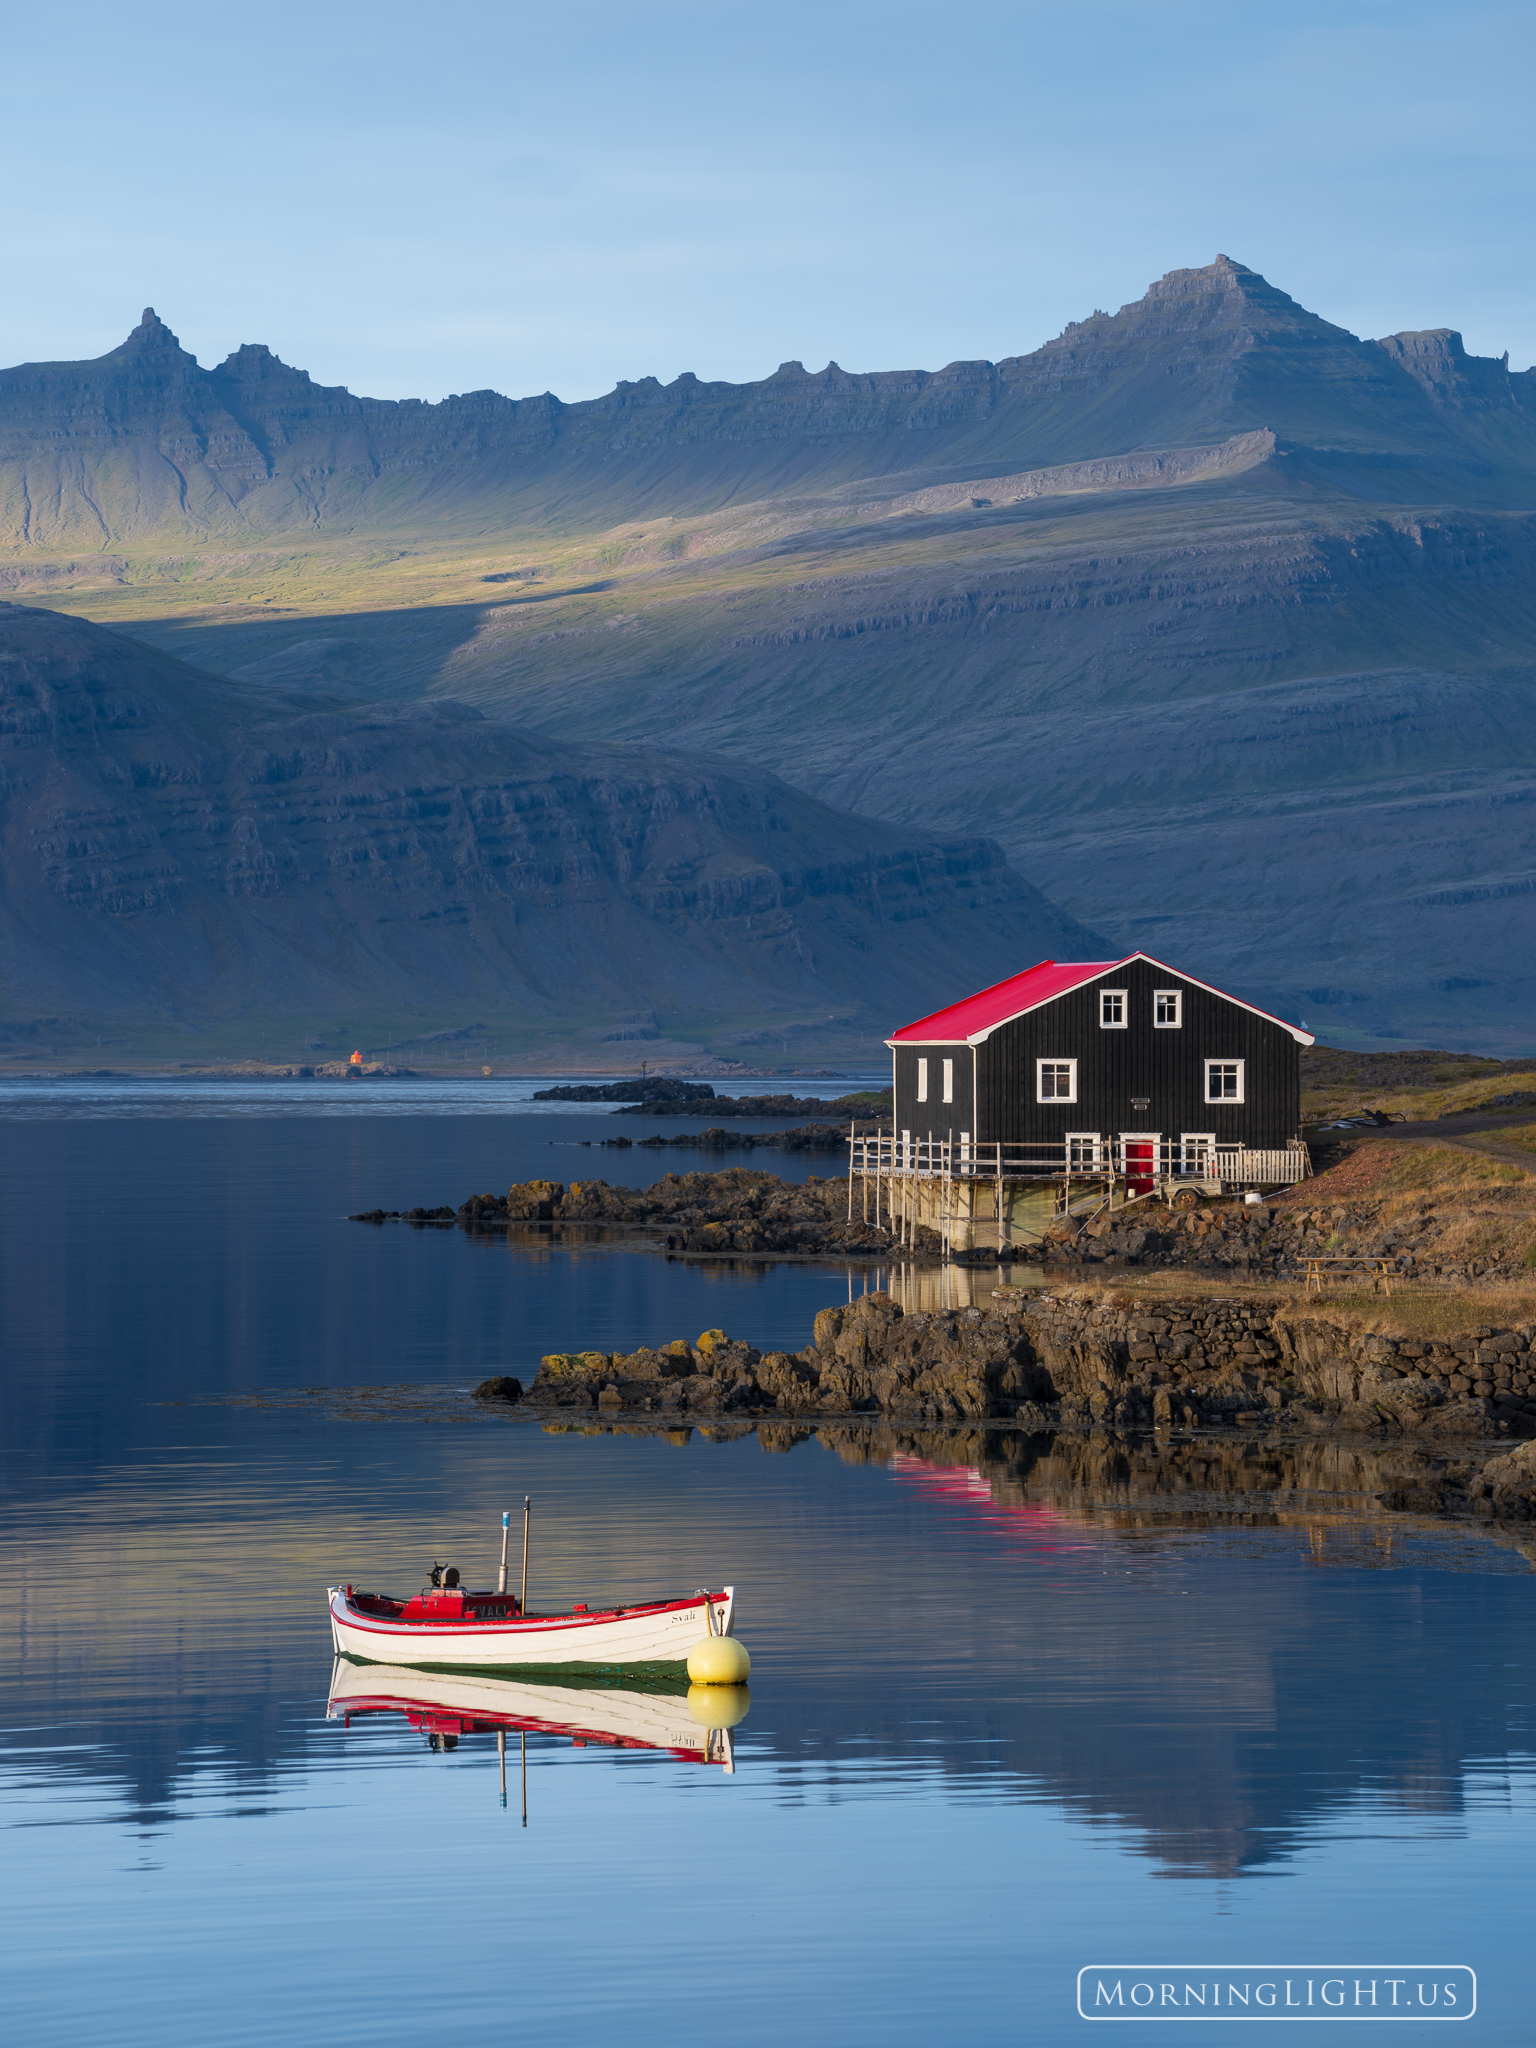 Mountains, ocean, a wooden fishing boat, and an idyllic wooden building all remind me of life on the north Atlantic. In many...